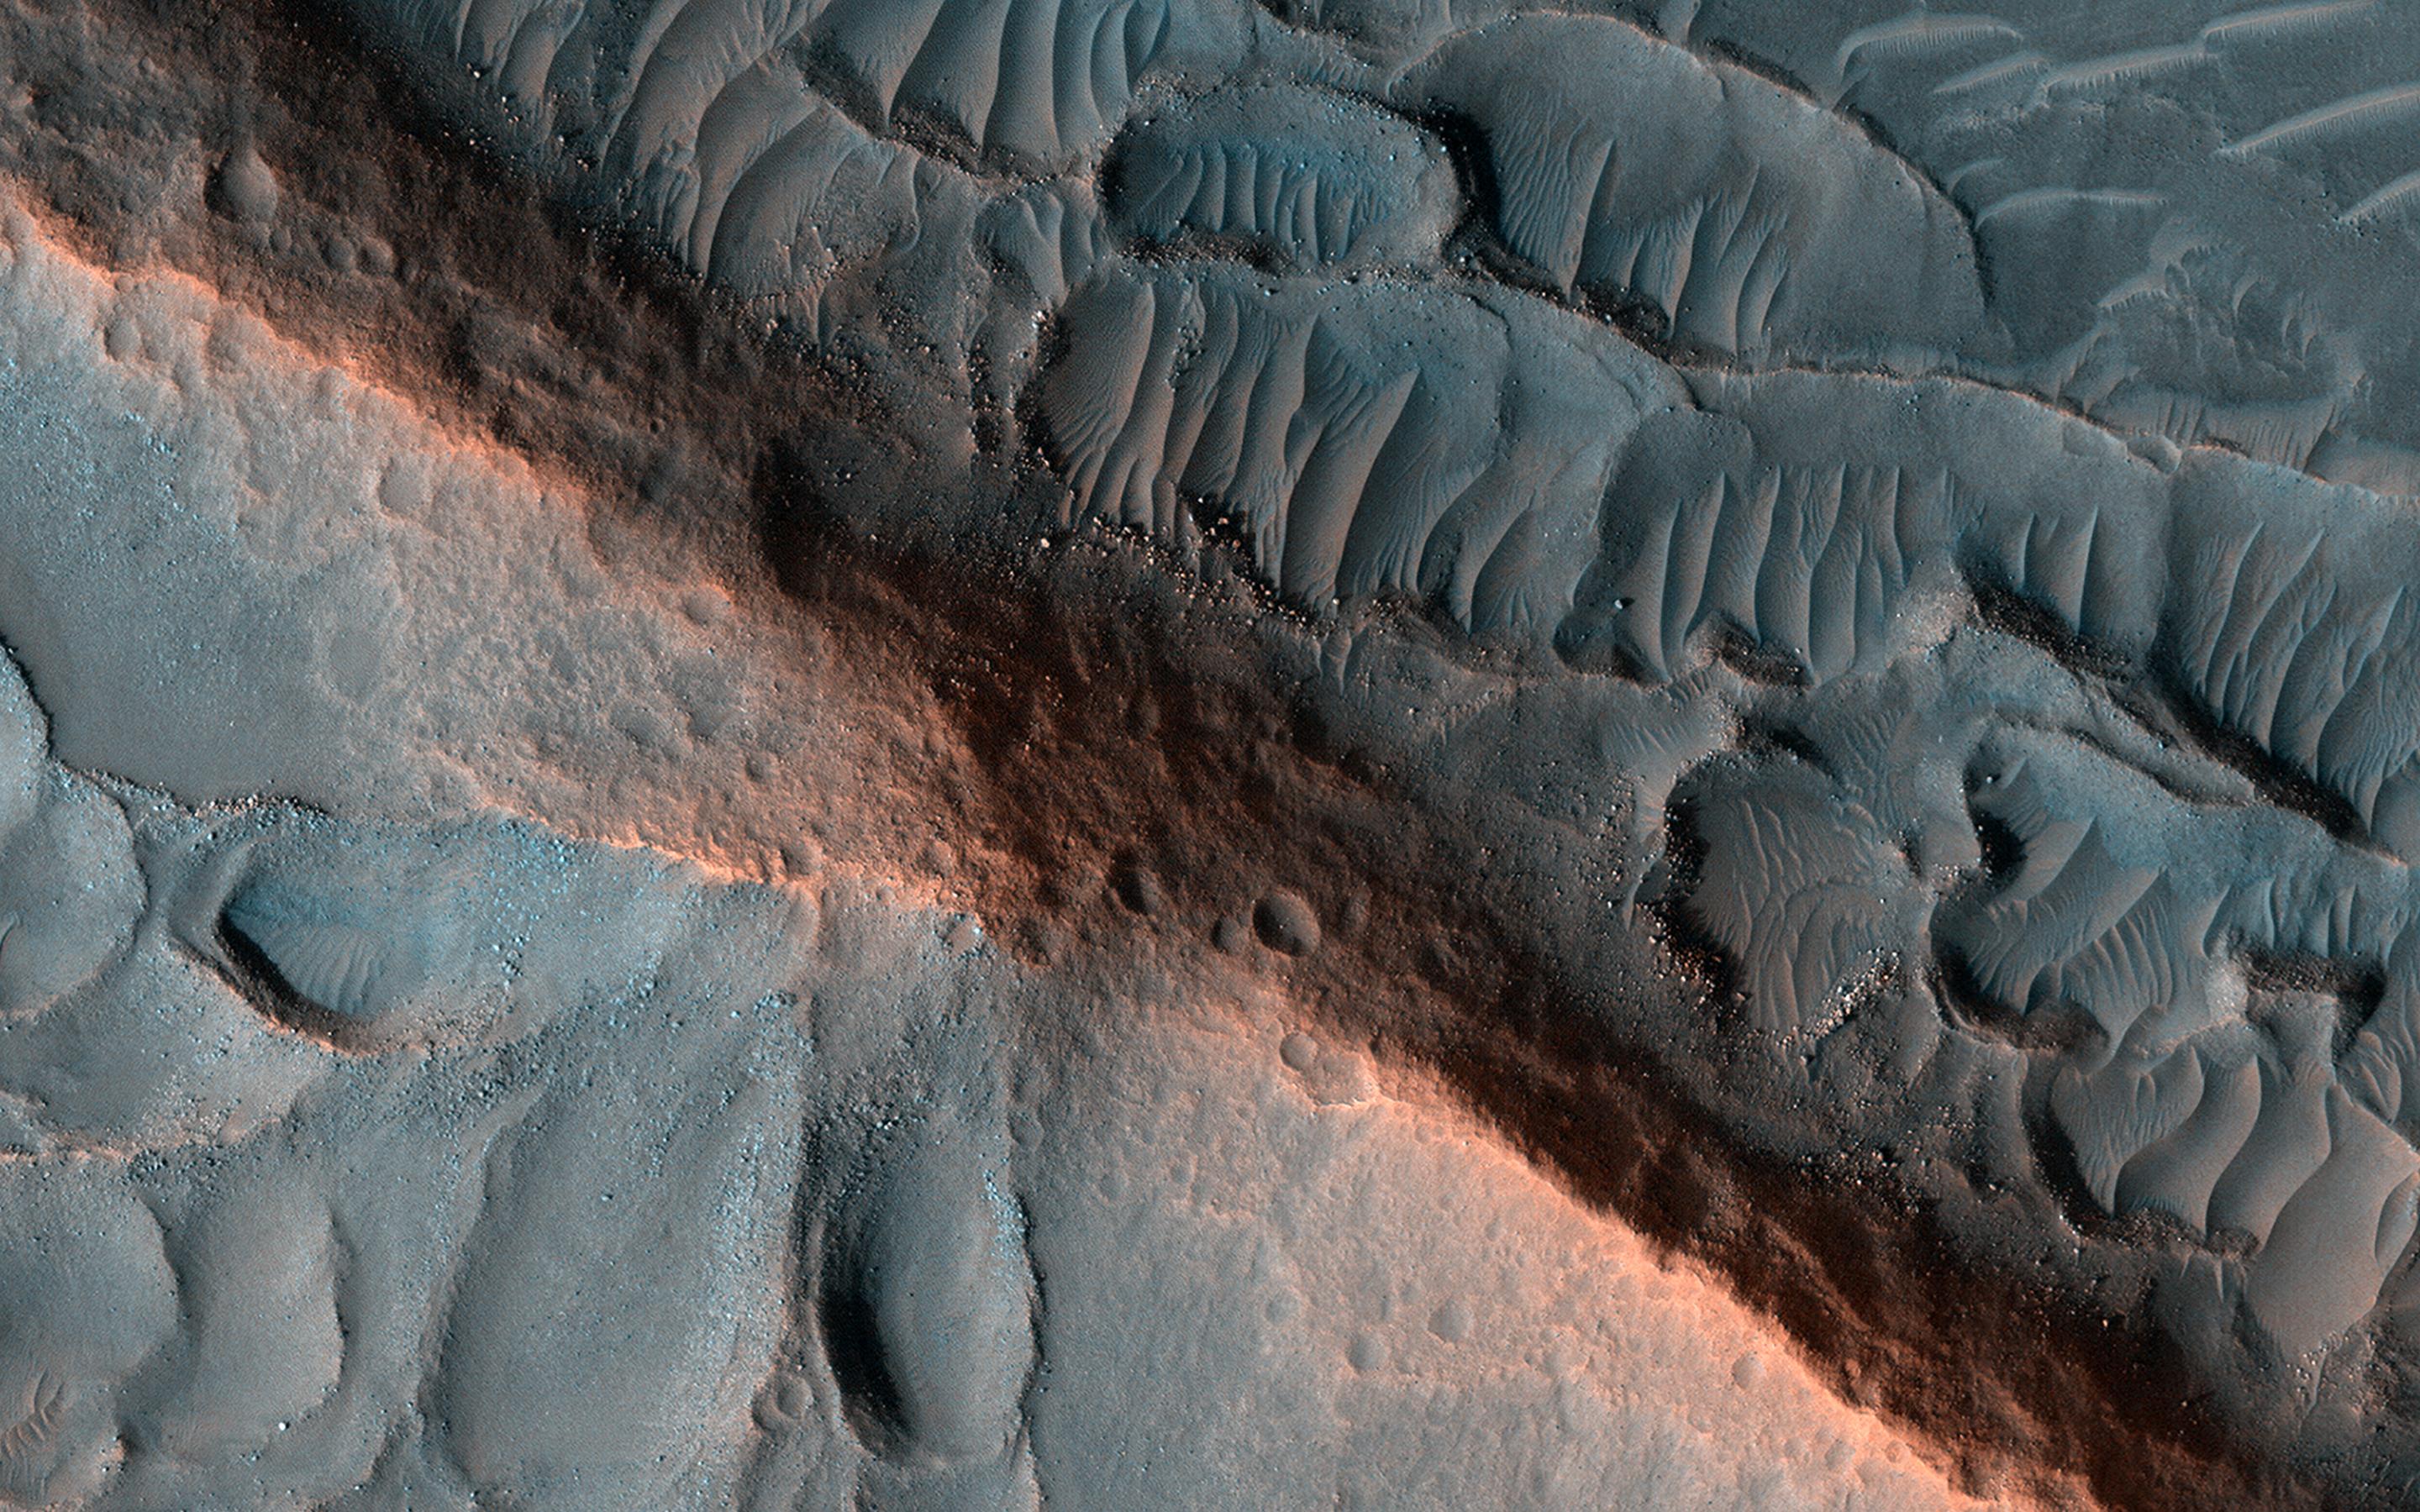 This image acquired on March 28, 2022 by NASAs Mars Reconnaissance Orbiter shows a ridge standing prominently in this scene, left behind as the surroundings were eroded, perhaps marking inverted erosion of an ancient fluvial channel.